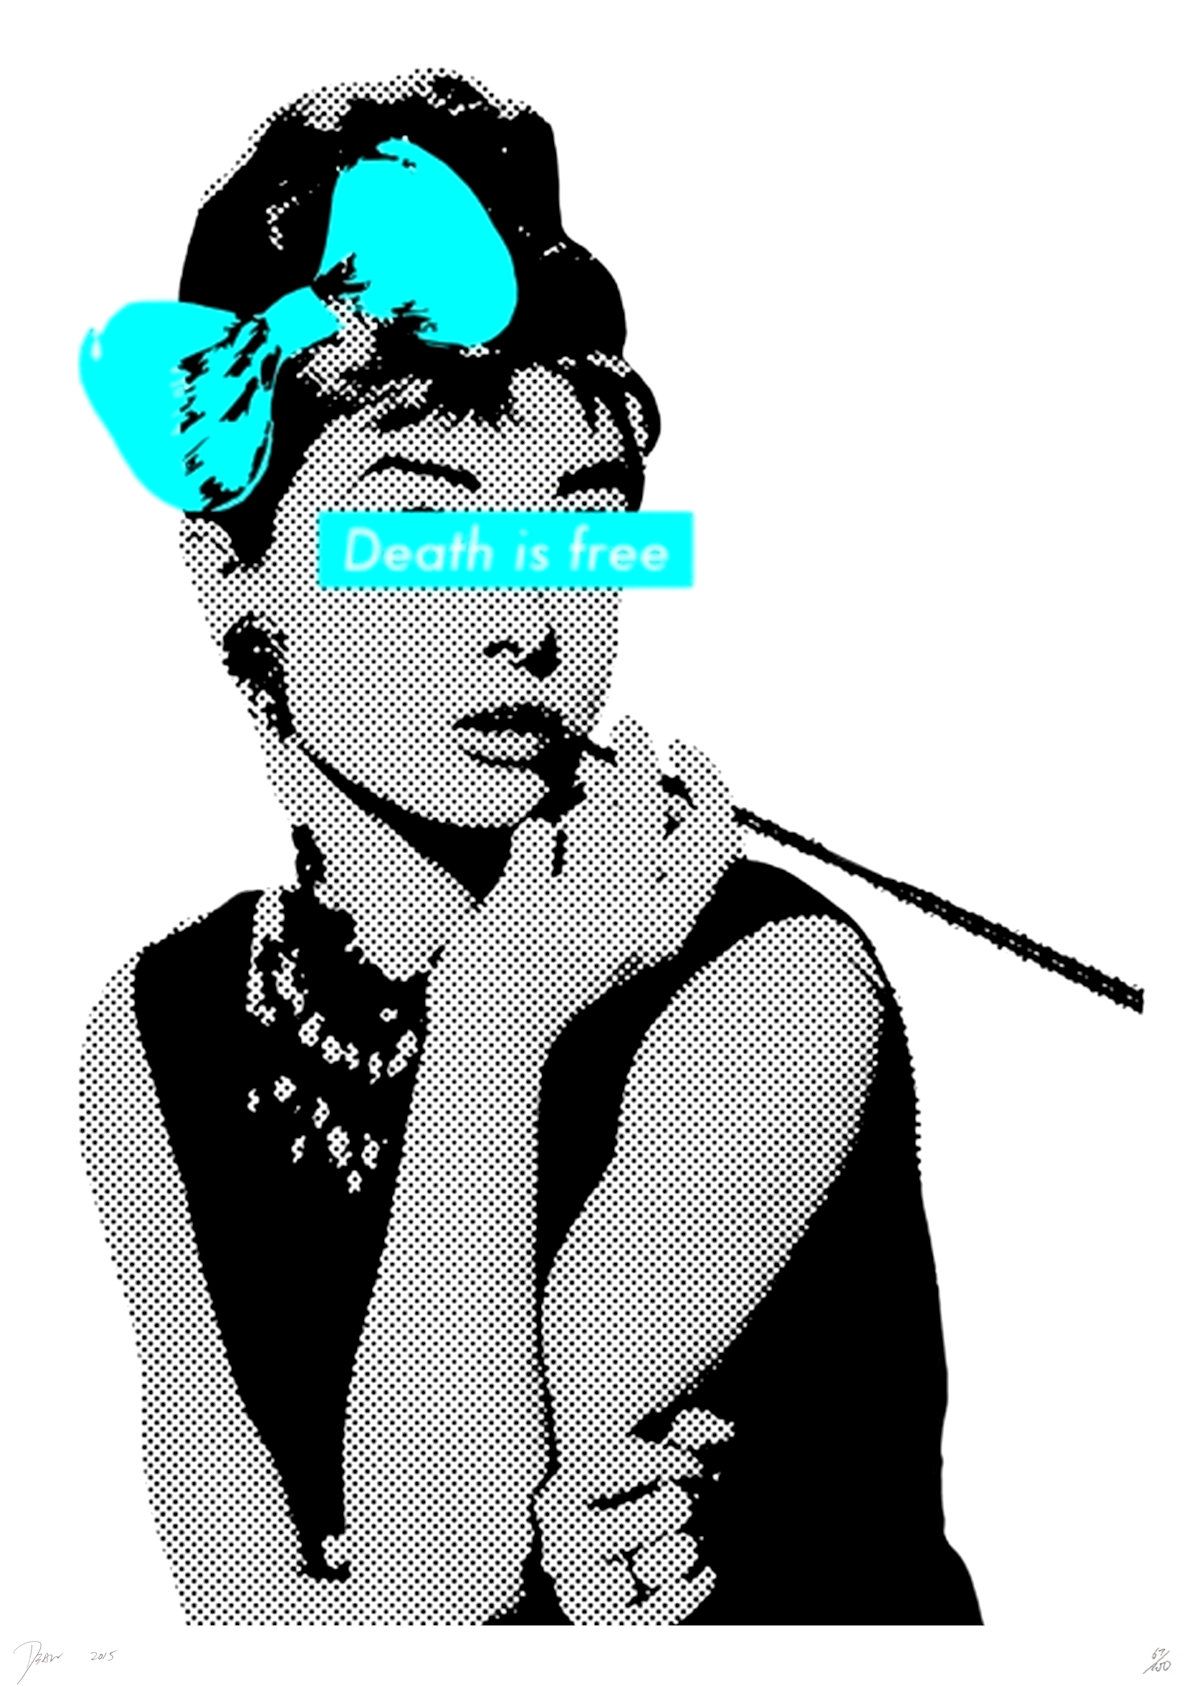 Death NYC Death NYC

Audrey Offset Blue, 2015

Screenprint

Limited edition of 1&hellip;